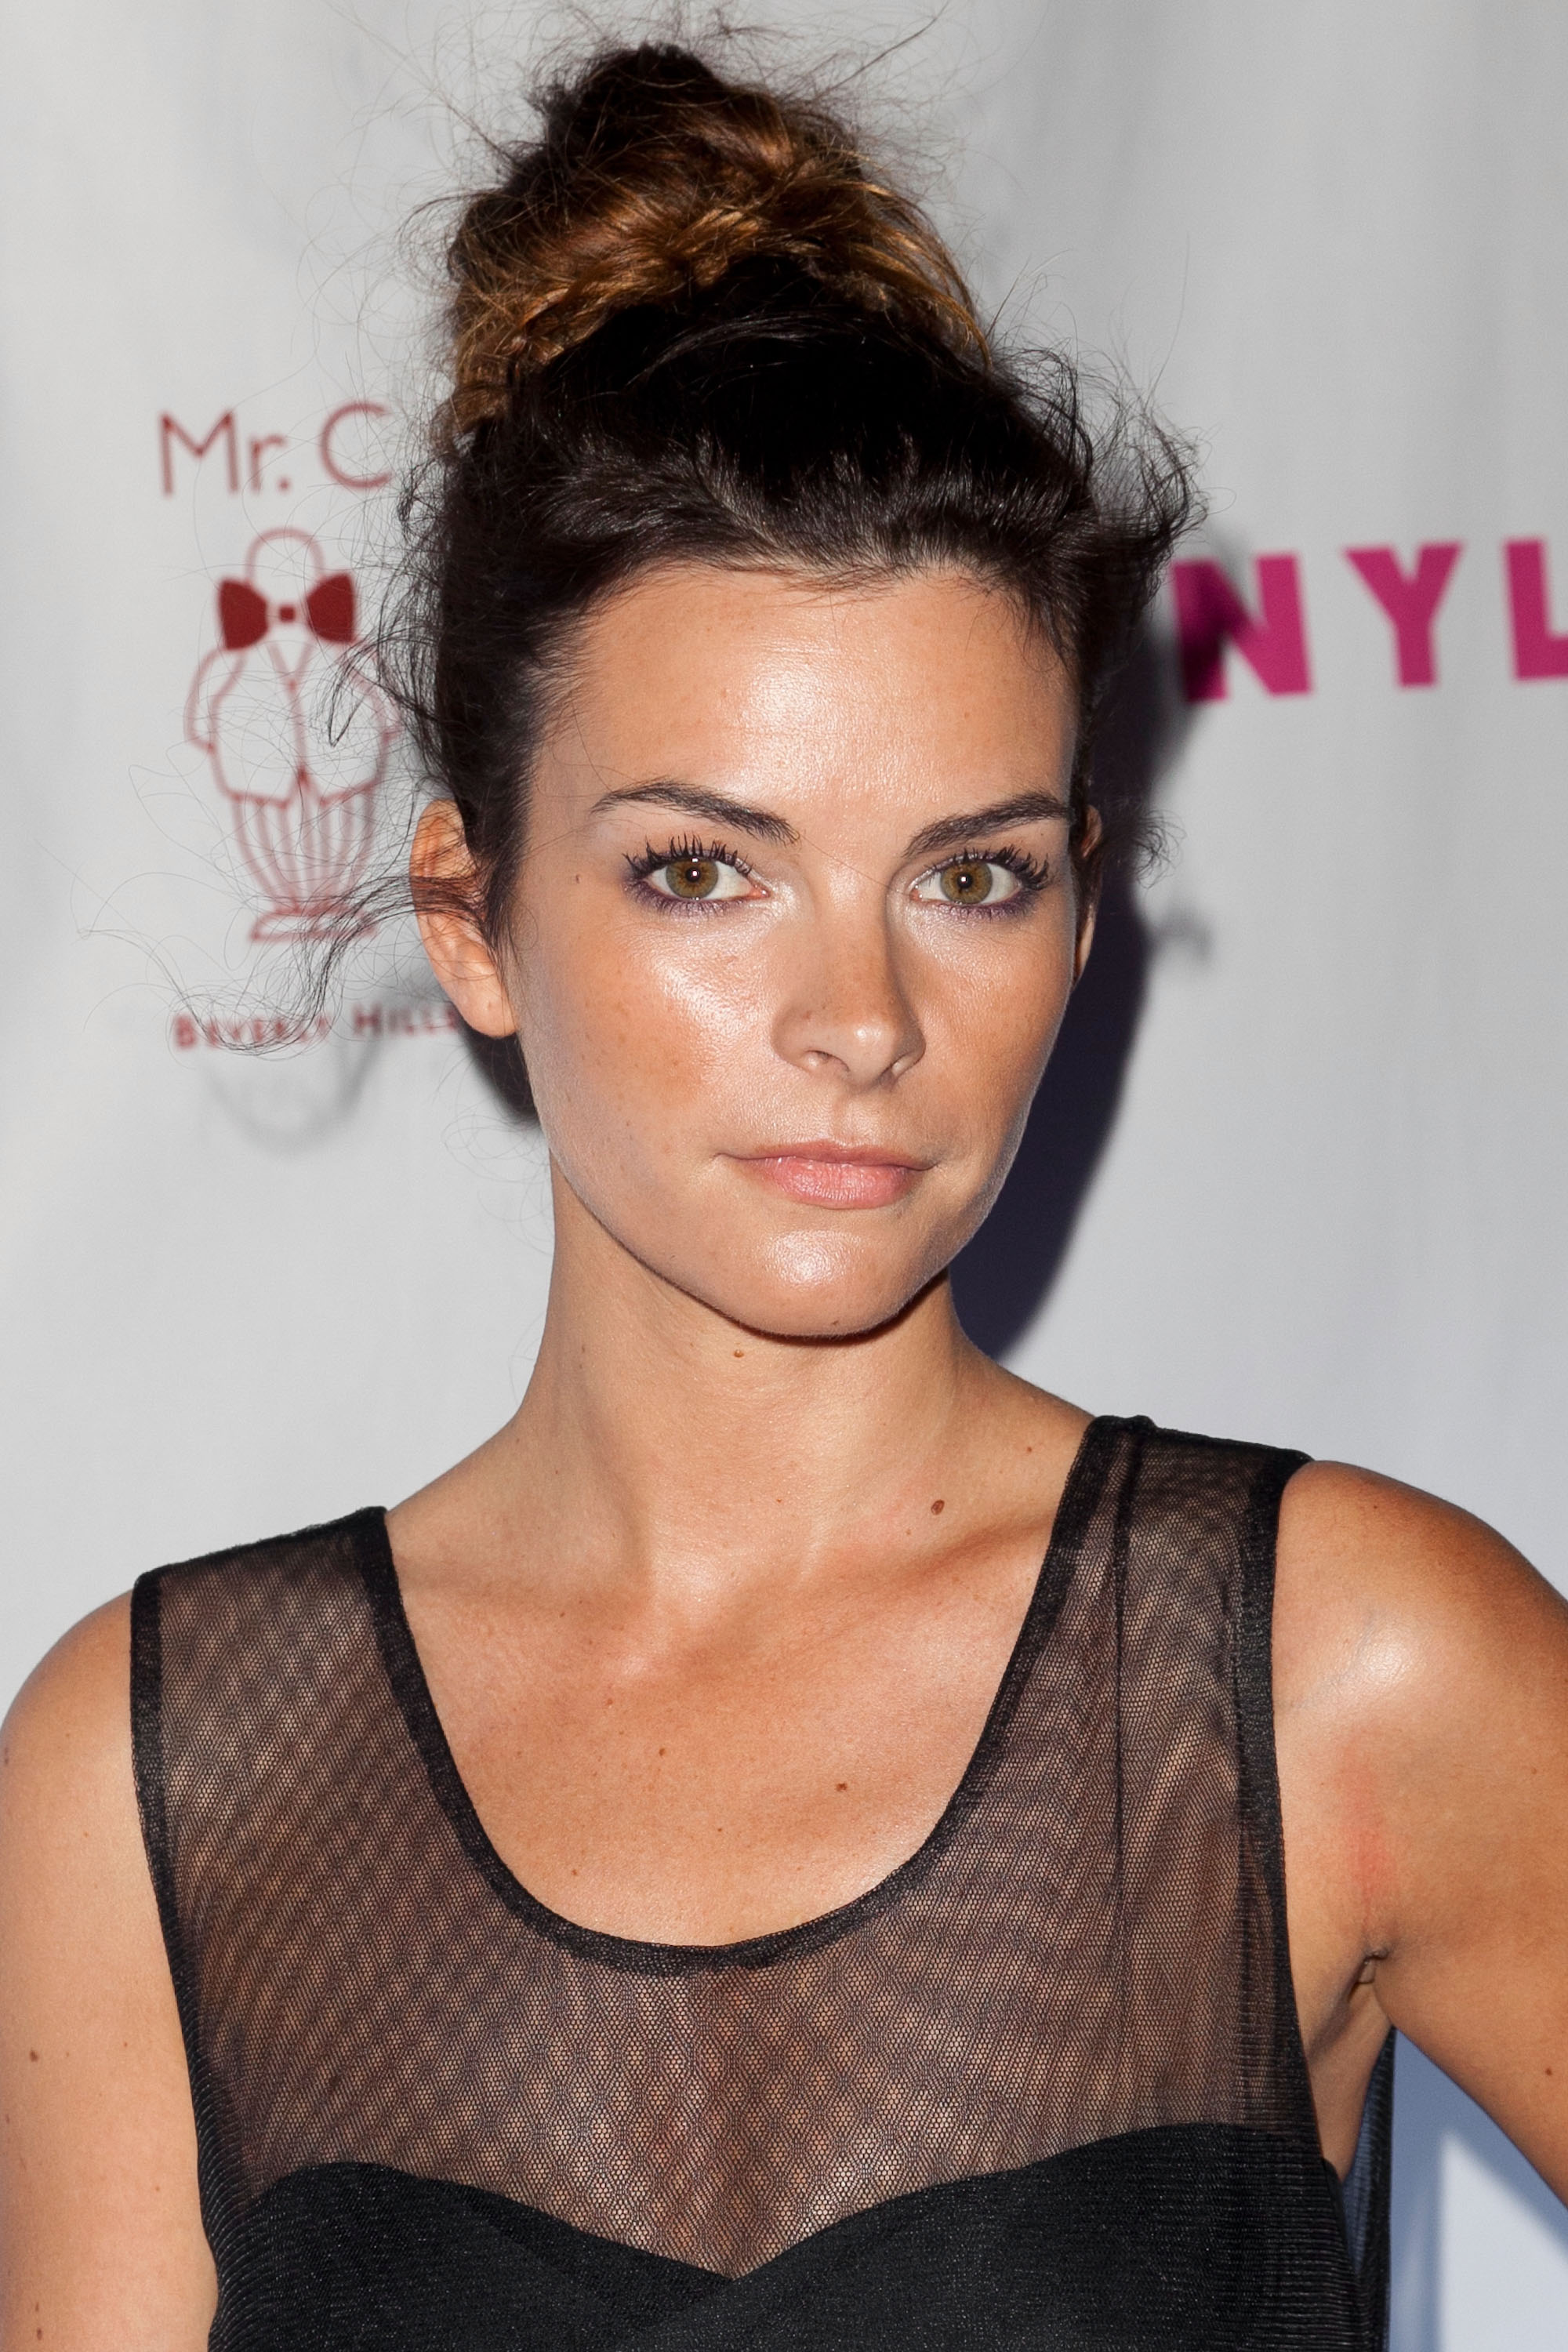 Kelly Oxford Is Not a Liar pic